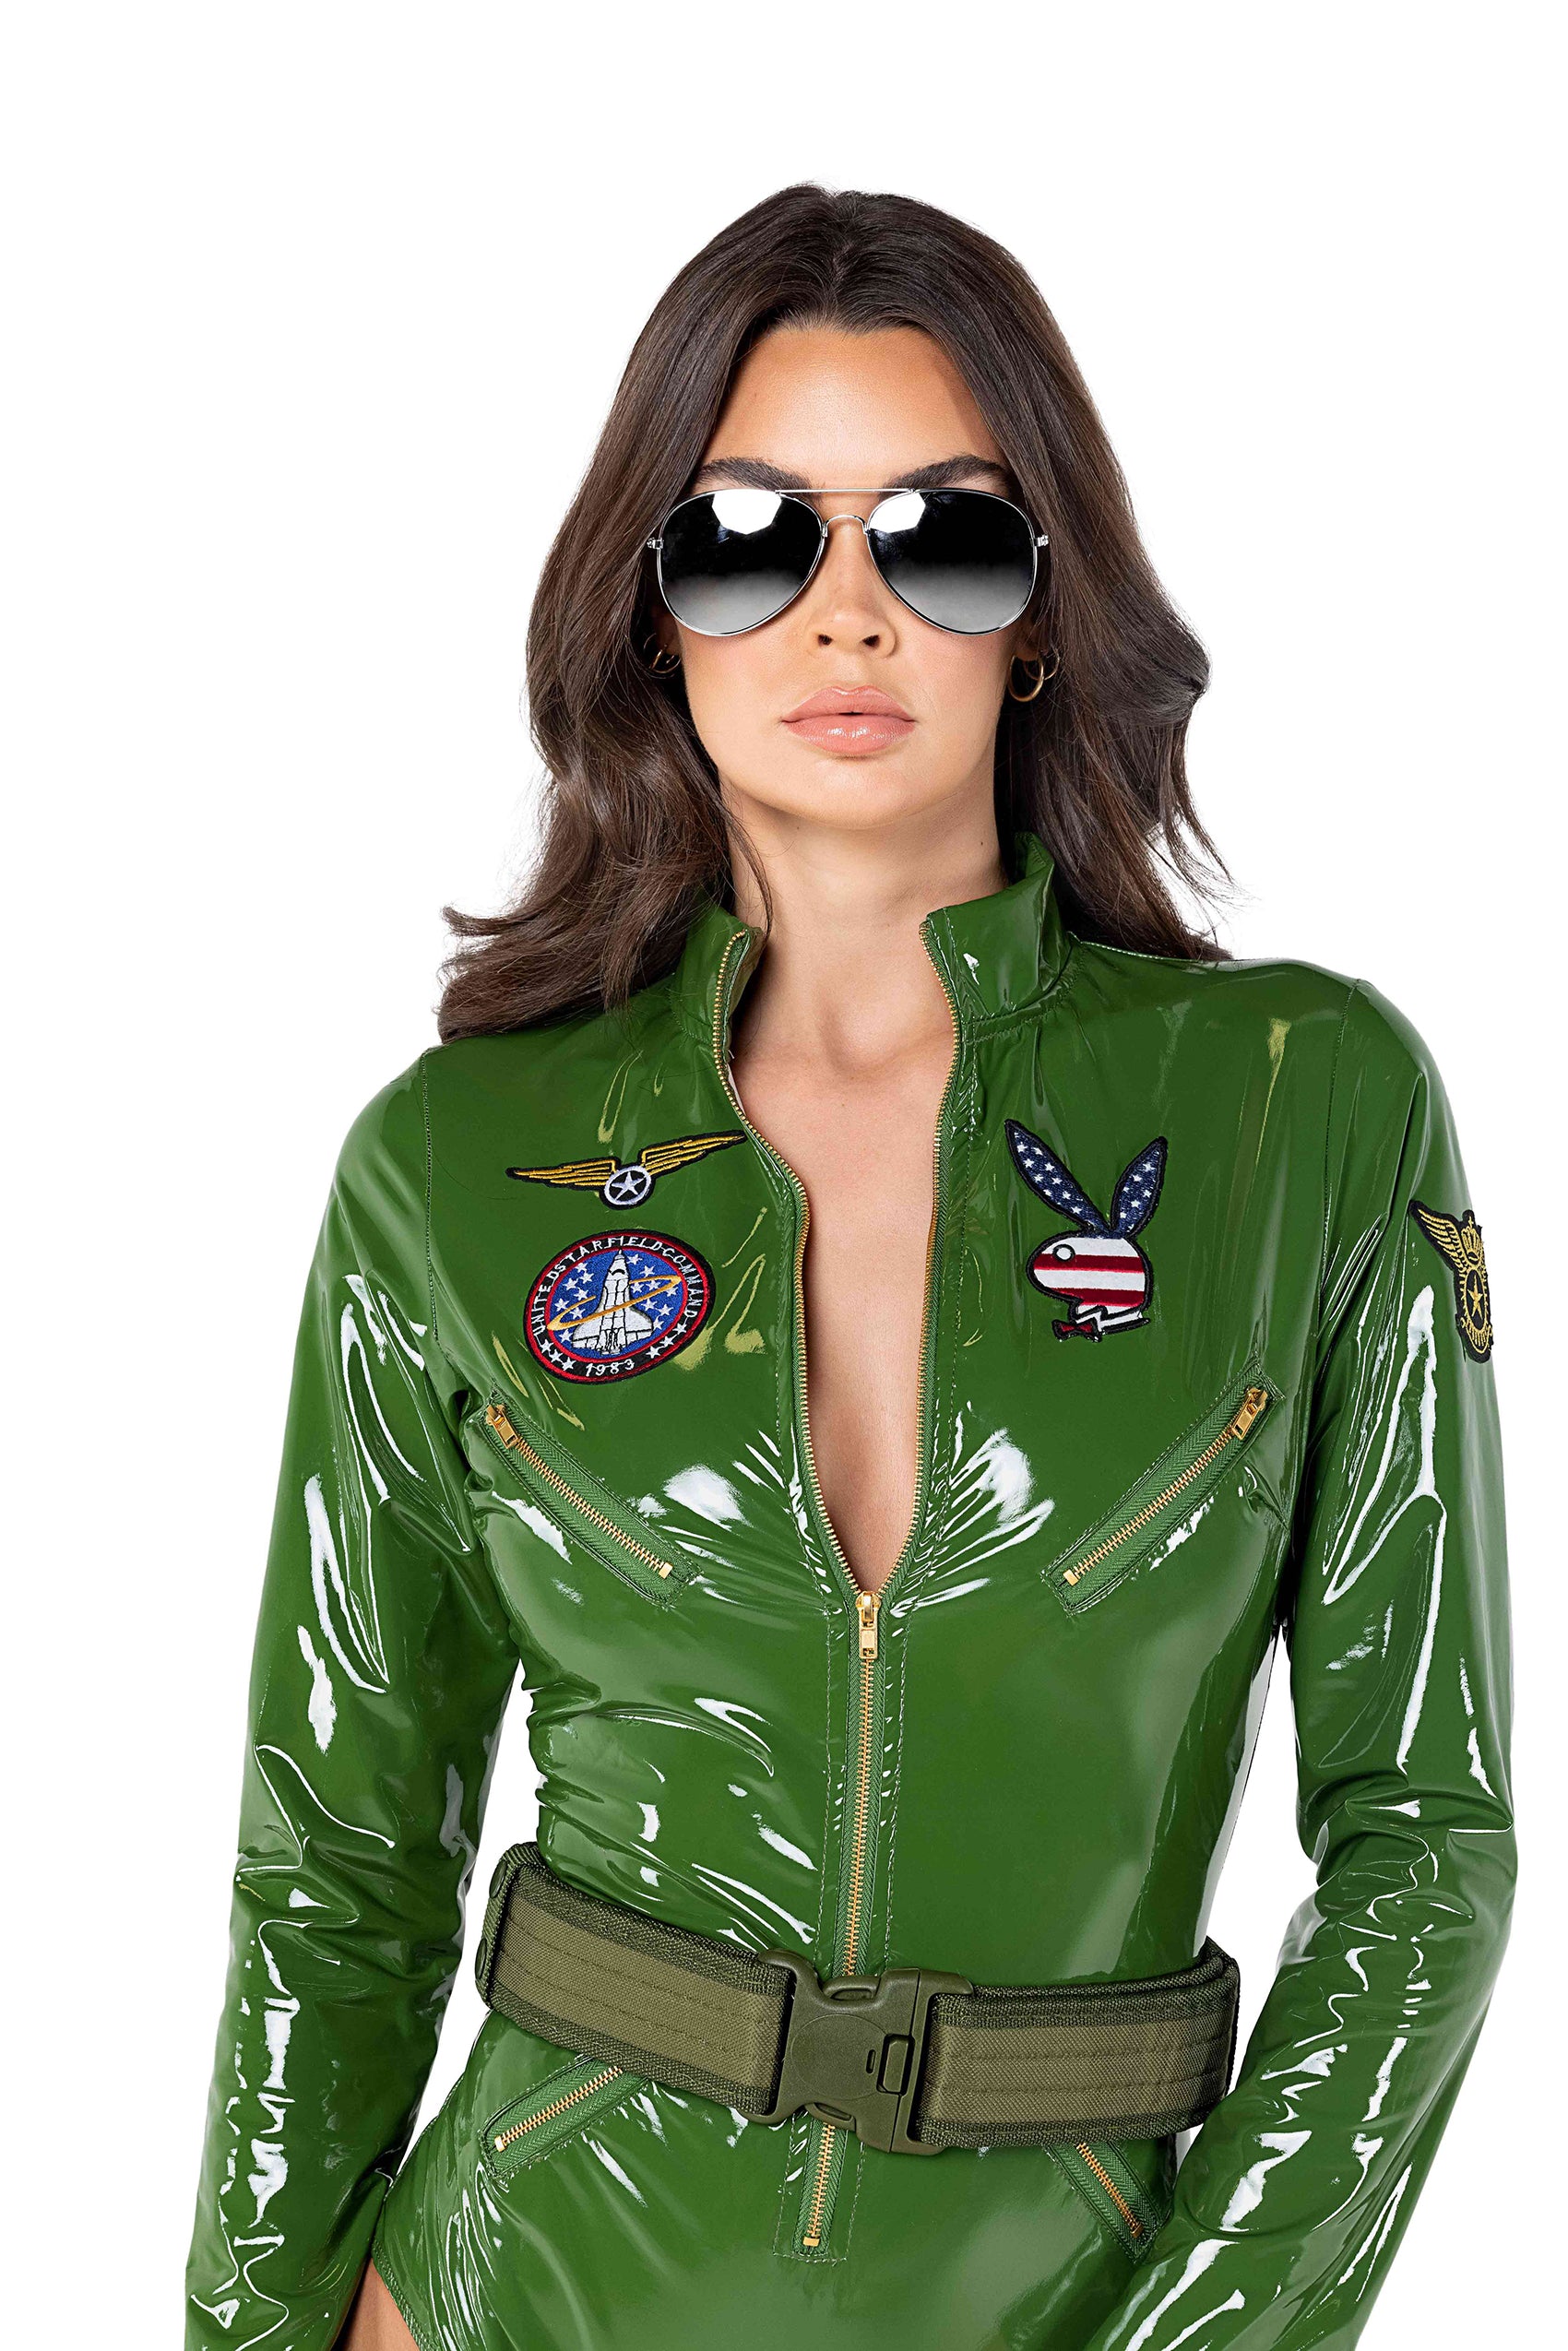 Playboy Top Gun Pilot Costume by ROMA in Size S, M, L, or XL